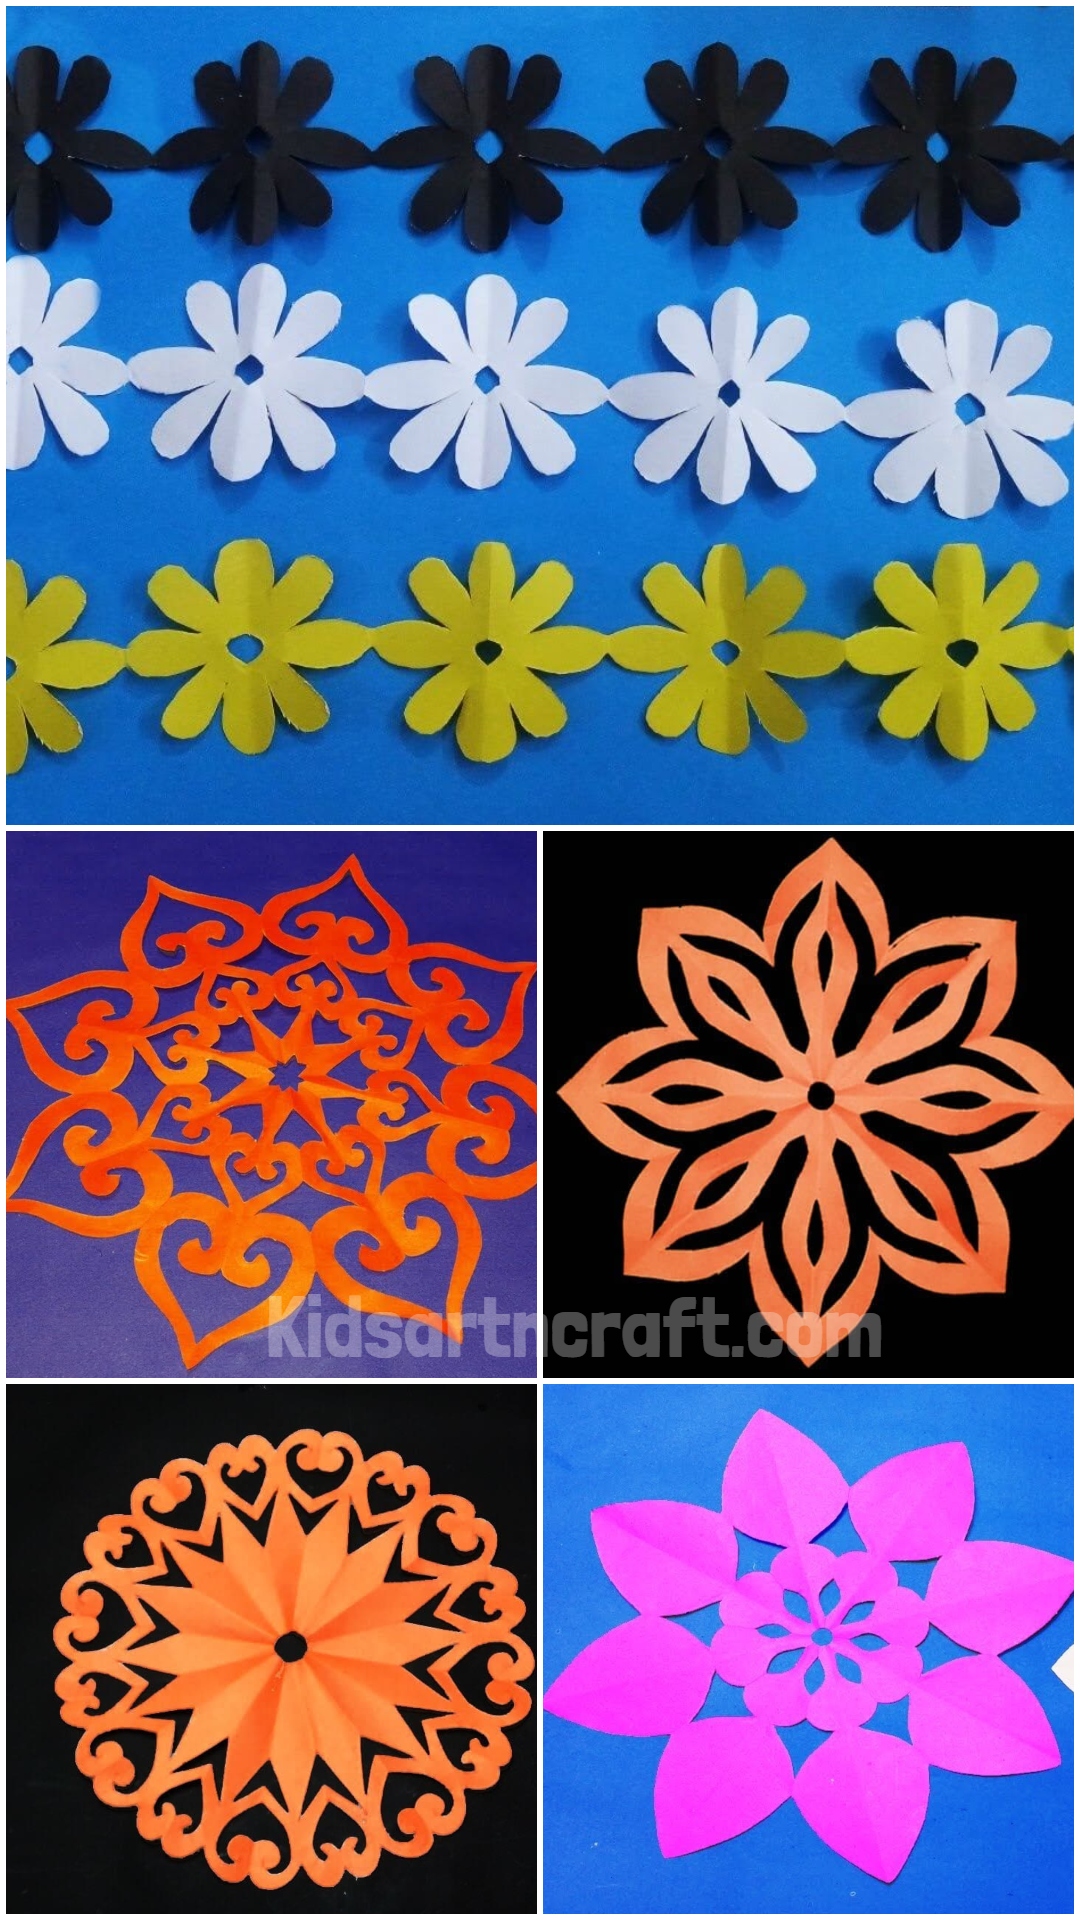 Paper Cutting Decoration idea for Festivals  Parties तयहर और  परटय क लए पपर डकरशन  YouTube